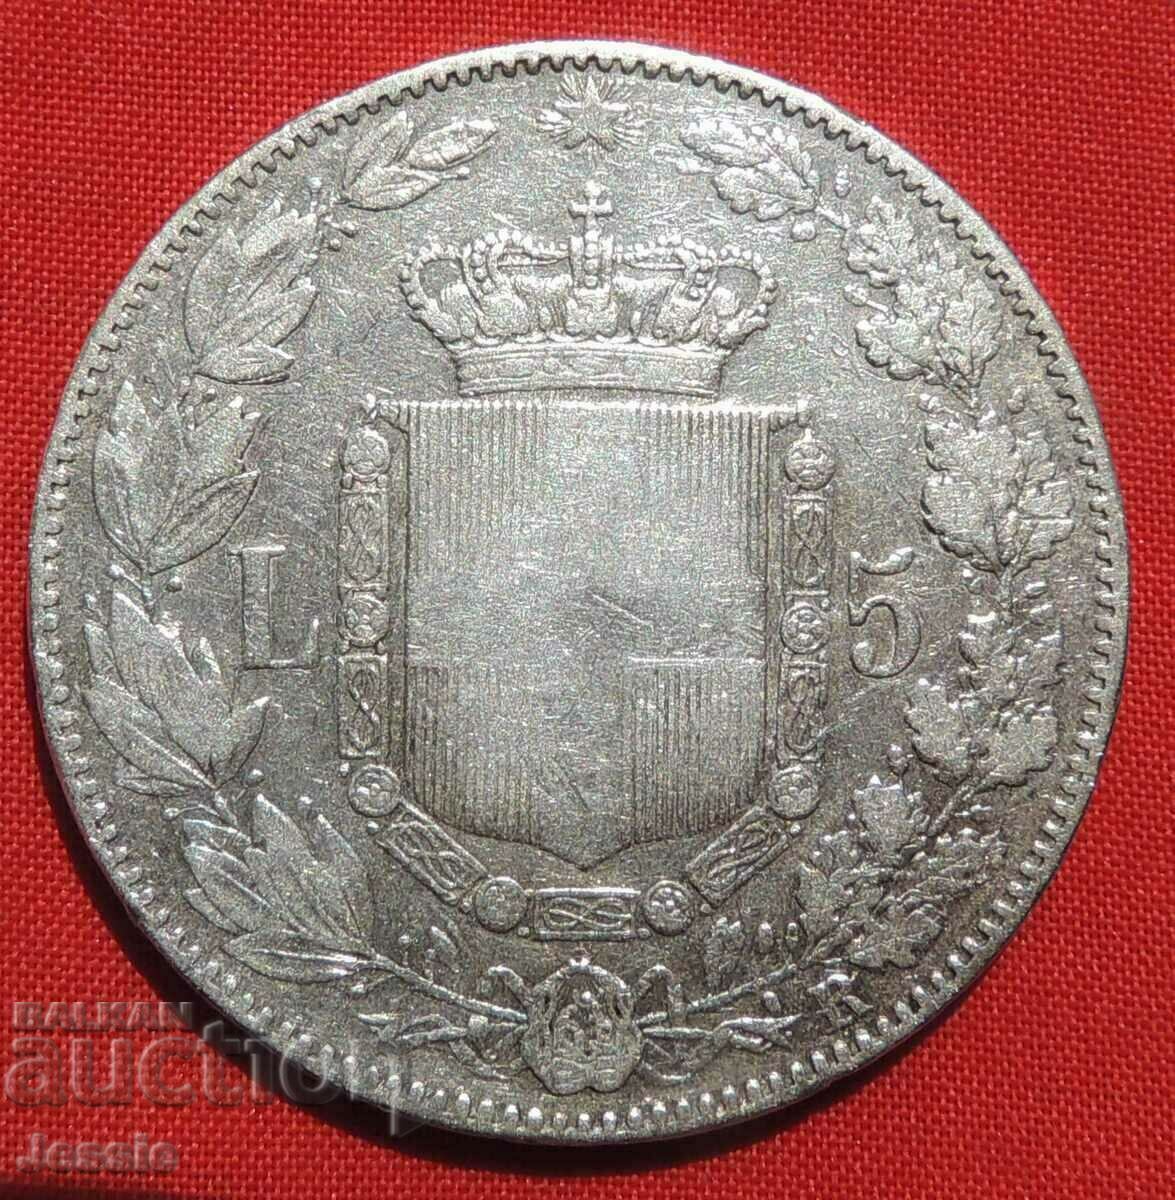 5 Lire 1879 R Italy silver NO MADE IN CHINA !